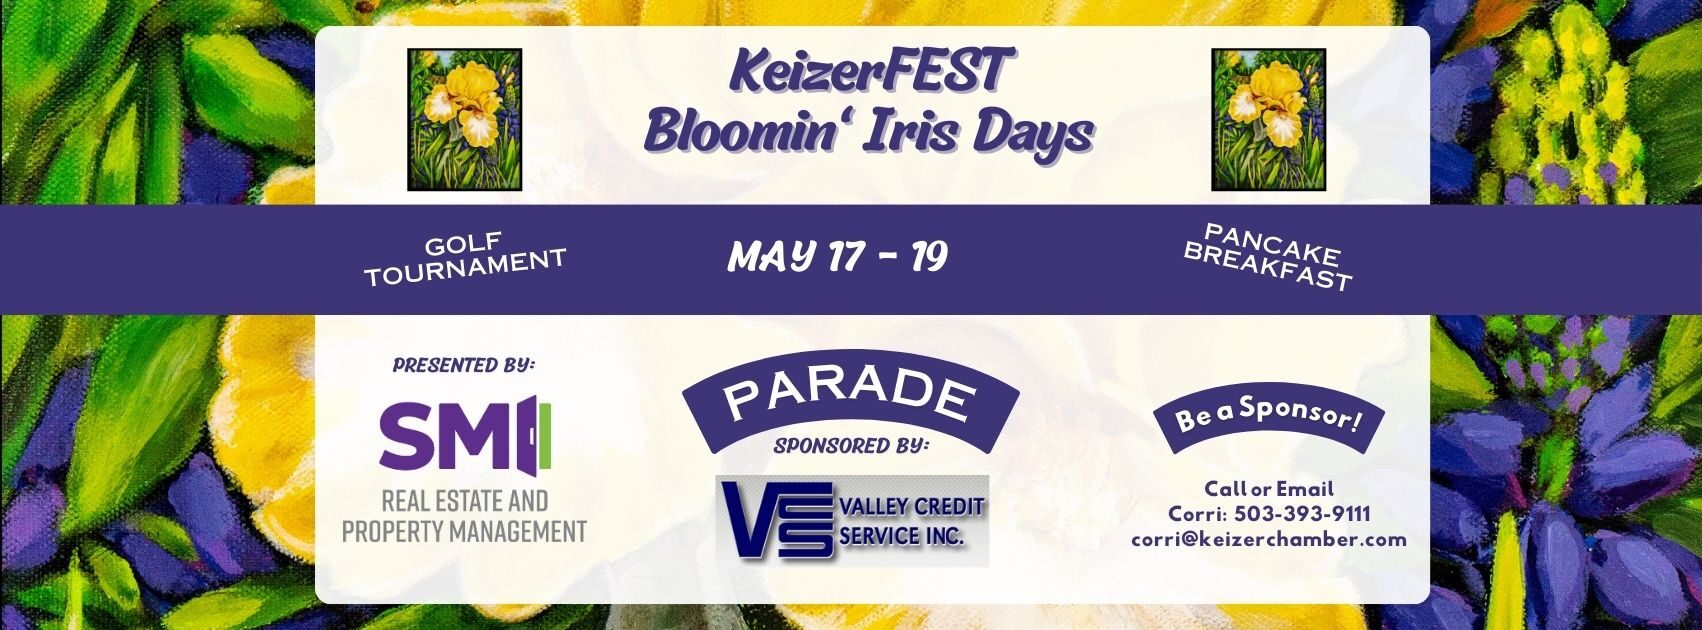 KeizerFEST Bloomin' Iris Days May 17-19 2024 - Parade + Marching Bands, Golf Tournament, Pancake Breakfast - Presented by SMI Real Estate and Property Management; Parade sponsored by Valley Credits Service